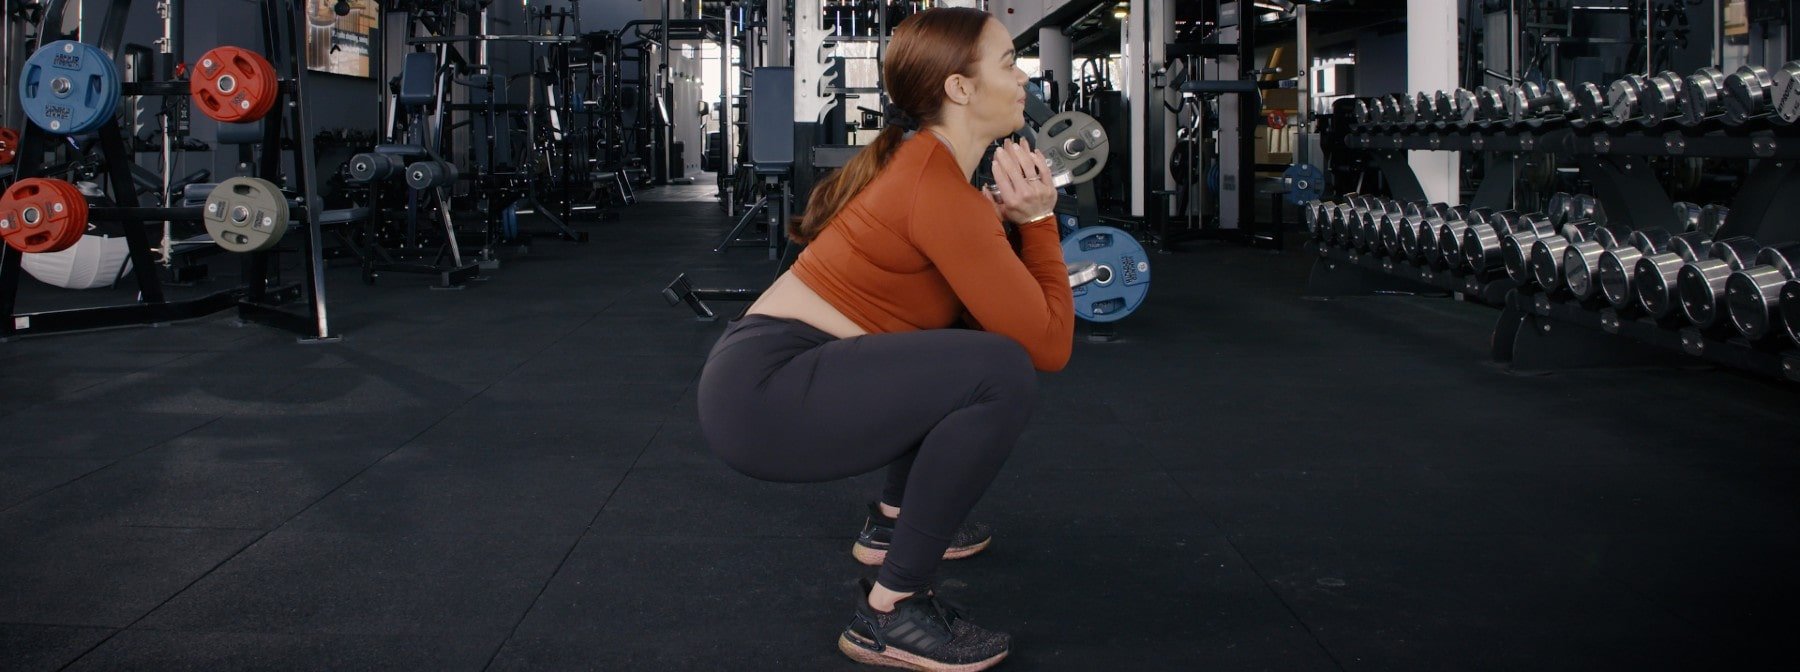 Grow Your Glutes & Legs With These 5 Squat Variations | Myprotein Masterclass